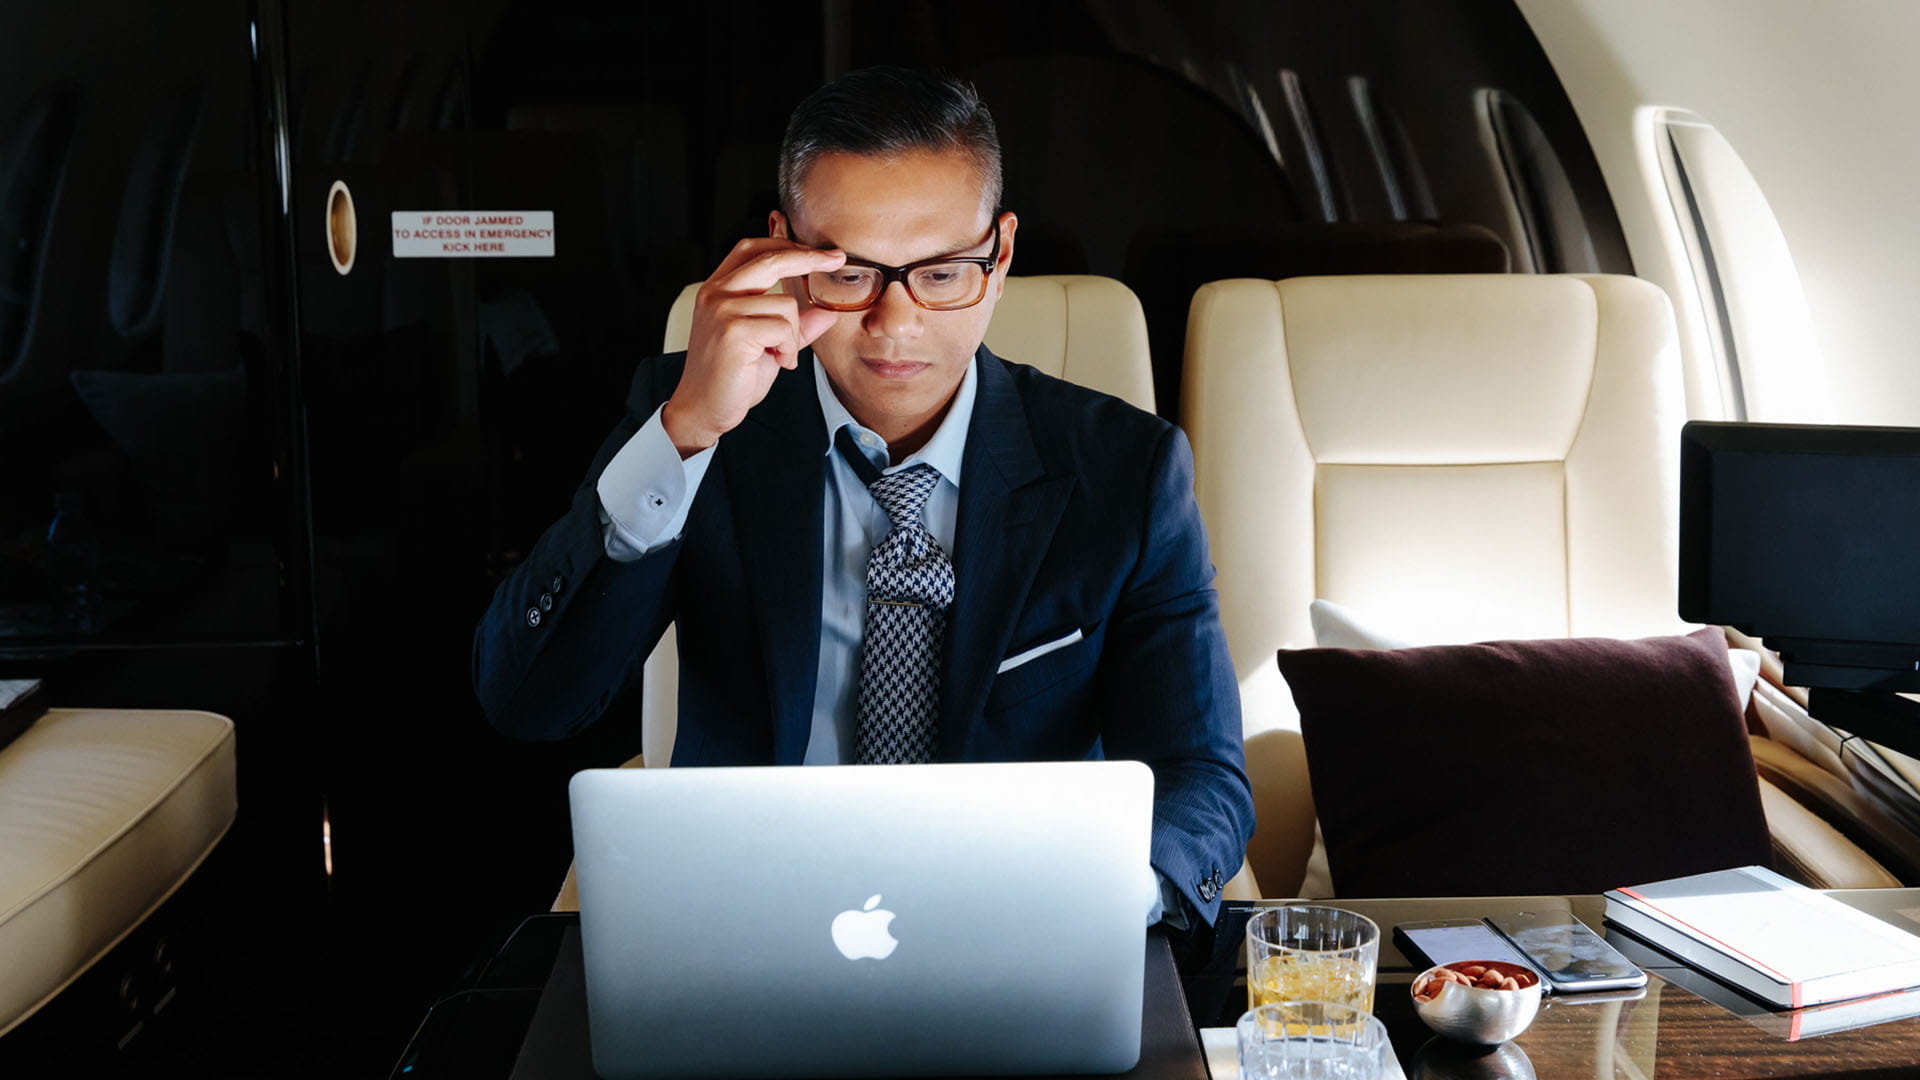 Man adjusting glasses while looking at laptop screen in a business jet